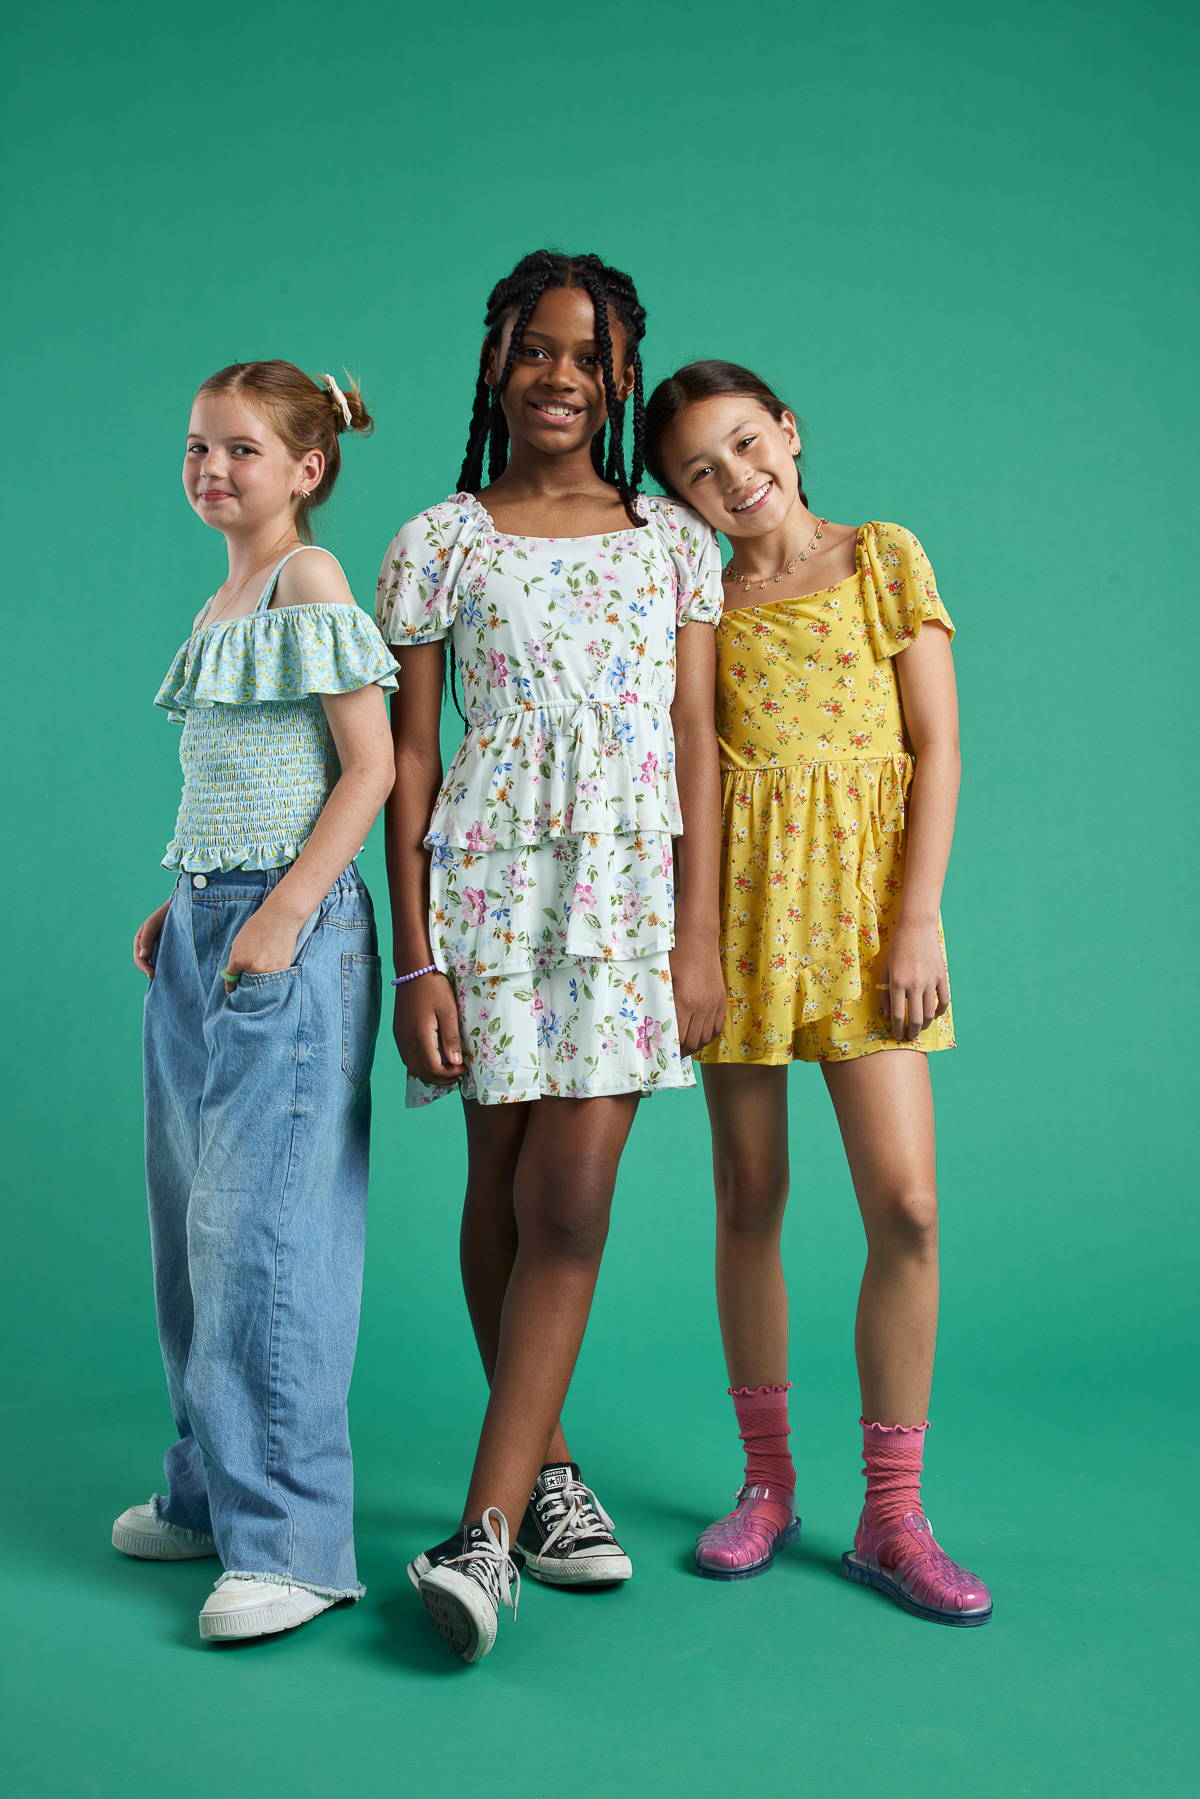 Trixxi girl kids shop all, 3 young girls in a trixxi teal floral ruffle top, white floral romper, and yellow floral romper. 